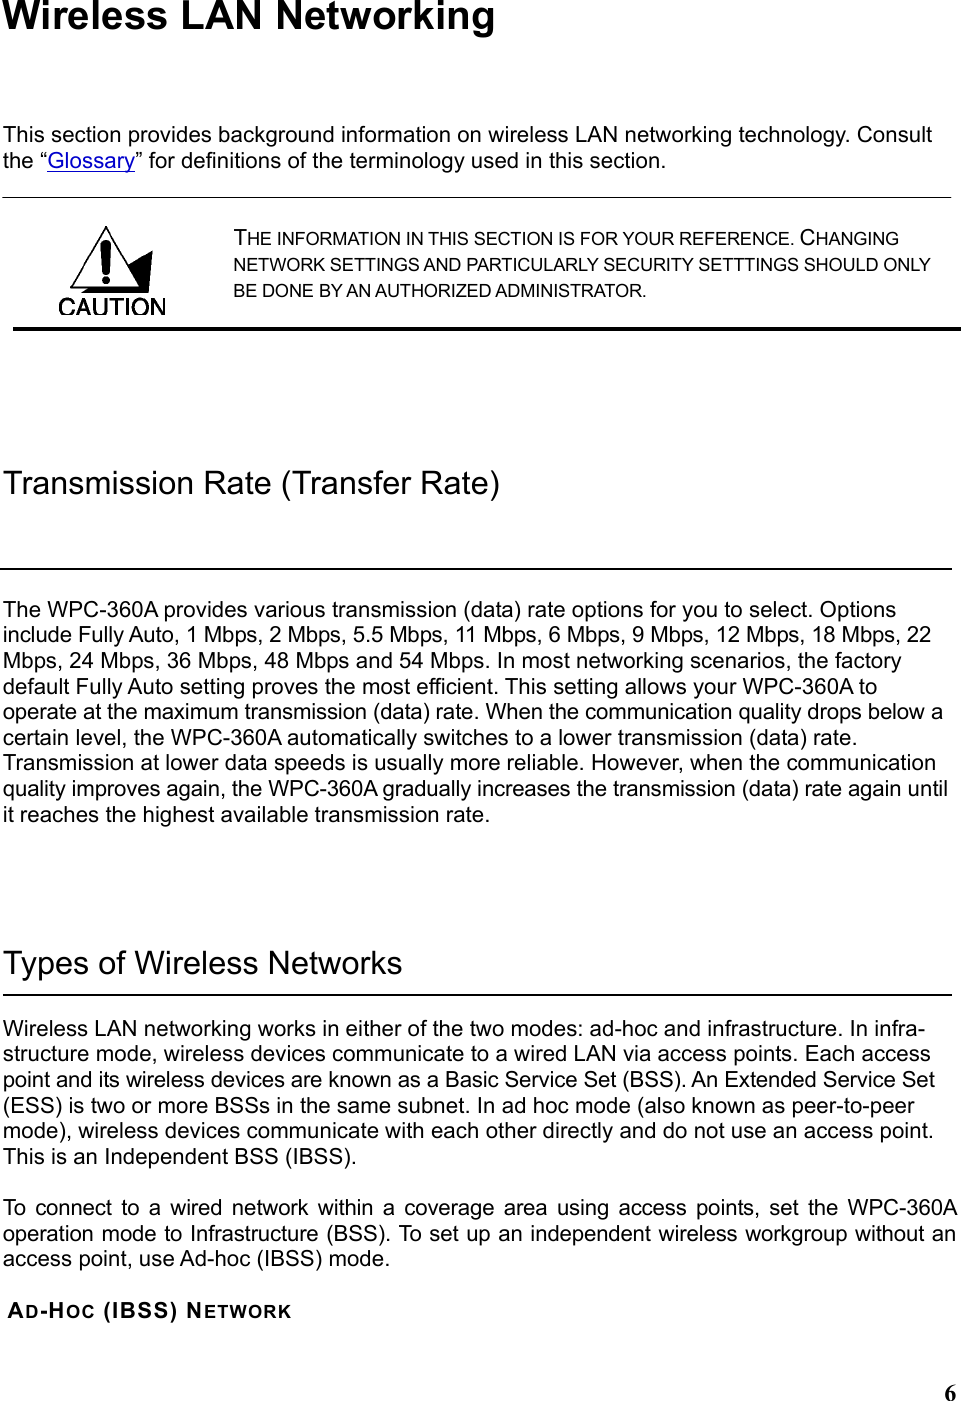  6Wireless LAN Networking This section provides background information on wireless LAN networking technology. Consult the “Glossary” for definitions of the terminology used in this section. THE INFORMATION IN THIS SECTION IS FOR YOUR REFERENCE. CHANGING NETWORK SETTINGS AND PARTICULARLY SECURITY SETTTINGS SHOULD ONLY BE DONE BY AN AUTHORIZED ADMINISTRATOR.  Transmission Rate (Transfer Rate) The WPC-360A provides various transmission (data) rate options for you to select. Options include Fully Auto, 1 Mbps, 2 Mbps, 5.5 Mbps, 11 Mbps, 6 Mbps, 9 Mbps, 12 Mbps, 18 Mbps, 22 Mbps, 24 Mbps, 36 Mbps, 48 Mbps and 54 Mbps. In most networking scenarios, the factory default Fully Auto setting proves the most efficient. This setting allows your WPC-360A to operate at the maximum transmission (data) rate. When the communication quality drops below a certain level, the WPC-360A automatically switches to a lower transmission (data) rate. Transmission at lower data speeds is usually more reliable. However, when the communication quality improves again, the WPC-360A gradually increases the transmission (data) rate again until it reaches the highest available transmission rate.  Types of Wireless Networks Wireless LAN networking works in either of the two modes: ad-hoc and infrastructure. In infra-structure mode, wireless devices communicate to a wired LAN via access points. Each access point and its wireless devices are known as a Basic Service Set (BSS). An Extended Service Set (ESS) is two or more BSSs in the same subnet. In ad hoc mode (also known as peer-to-peer mode), wireless devices communicate with each other directly and do not use an access point. This is an Independent BSS (IBSS).  To connect to a wired network within a coverage area using access points, set the WPC-360A operation mode to Infrastructure (BSS). To set up an independent wireless workgroup without an access point, use Ad-hoc (IBSS) mode.  AD-HOC (IBSS) NETWORK  